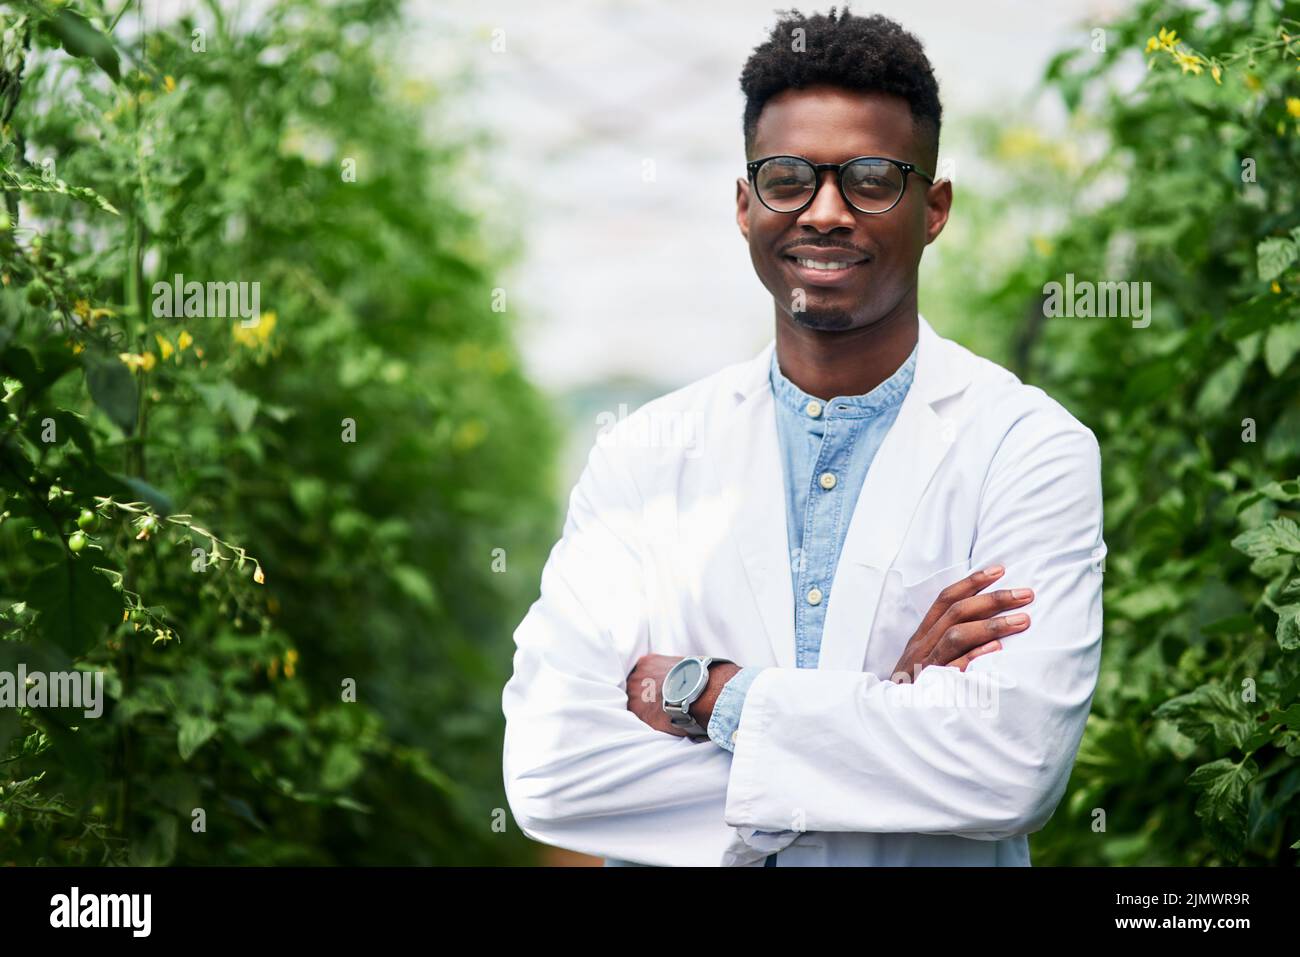 Who wouldnt love working in the fresh open air. Portrait of a handsome young botanist posing with his arms folded outdoors in nature. Stock Photo